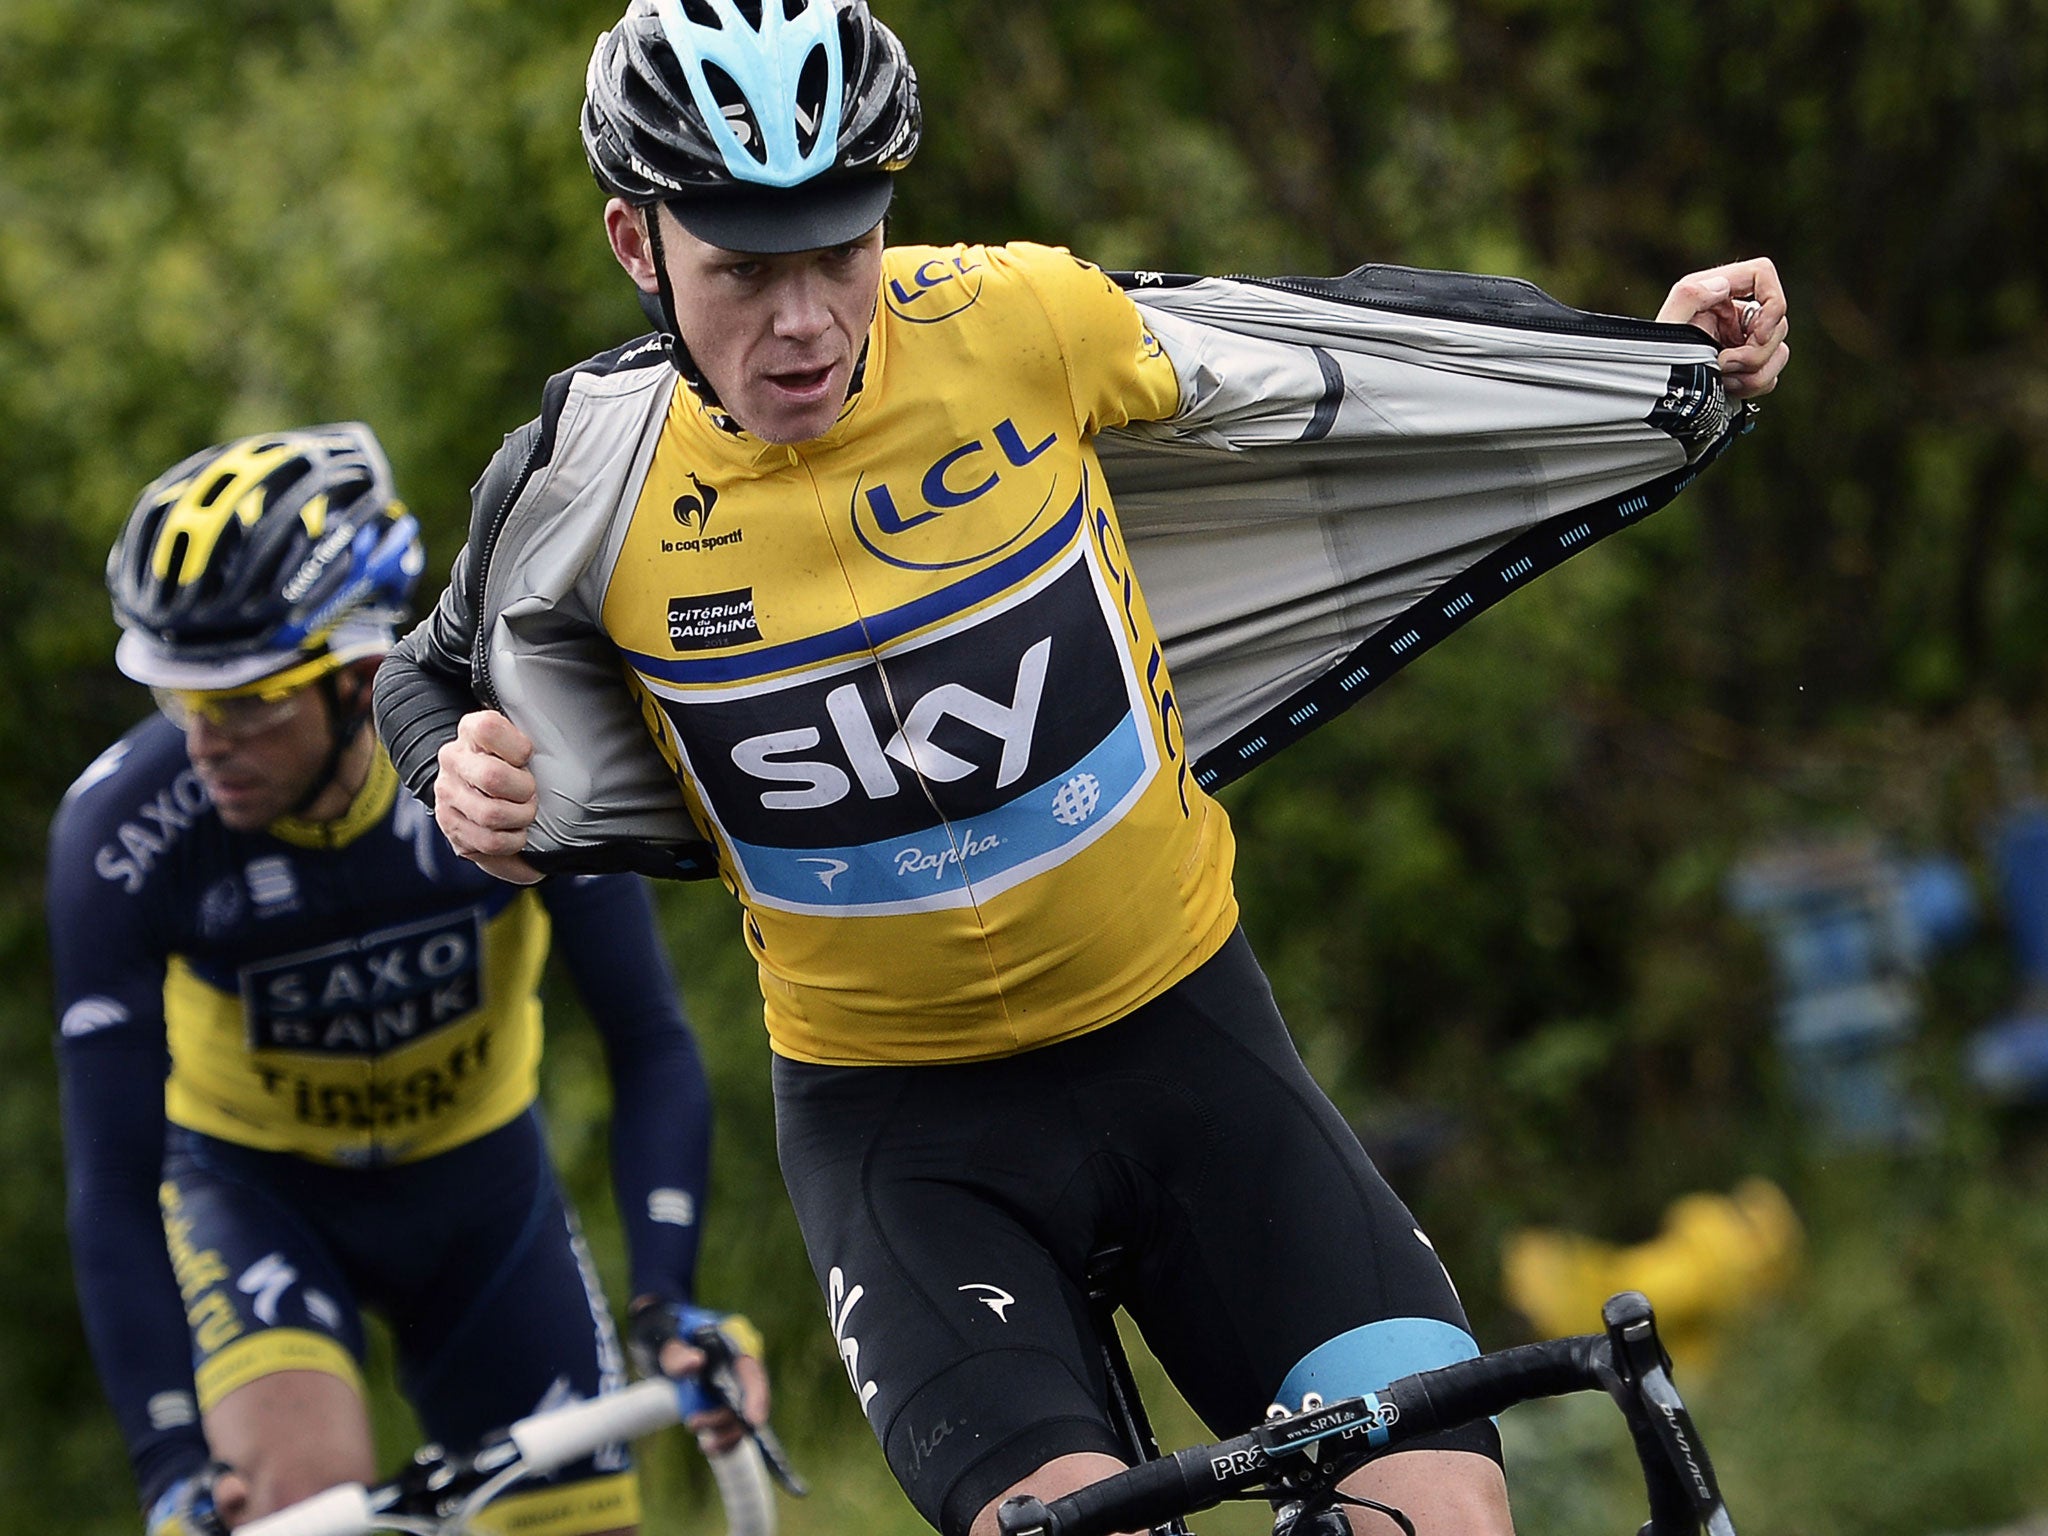 Chris Froome removes his raincoat as he rides during yesterday’s final stage between Sisteron and Risoul